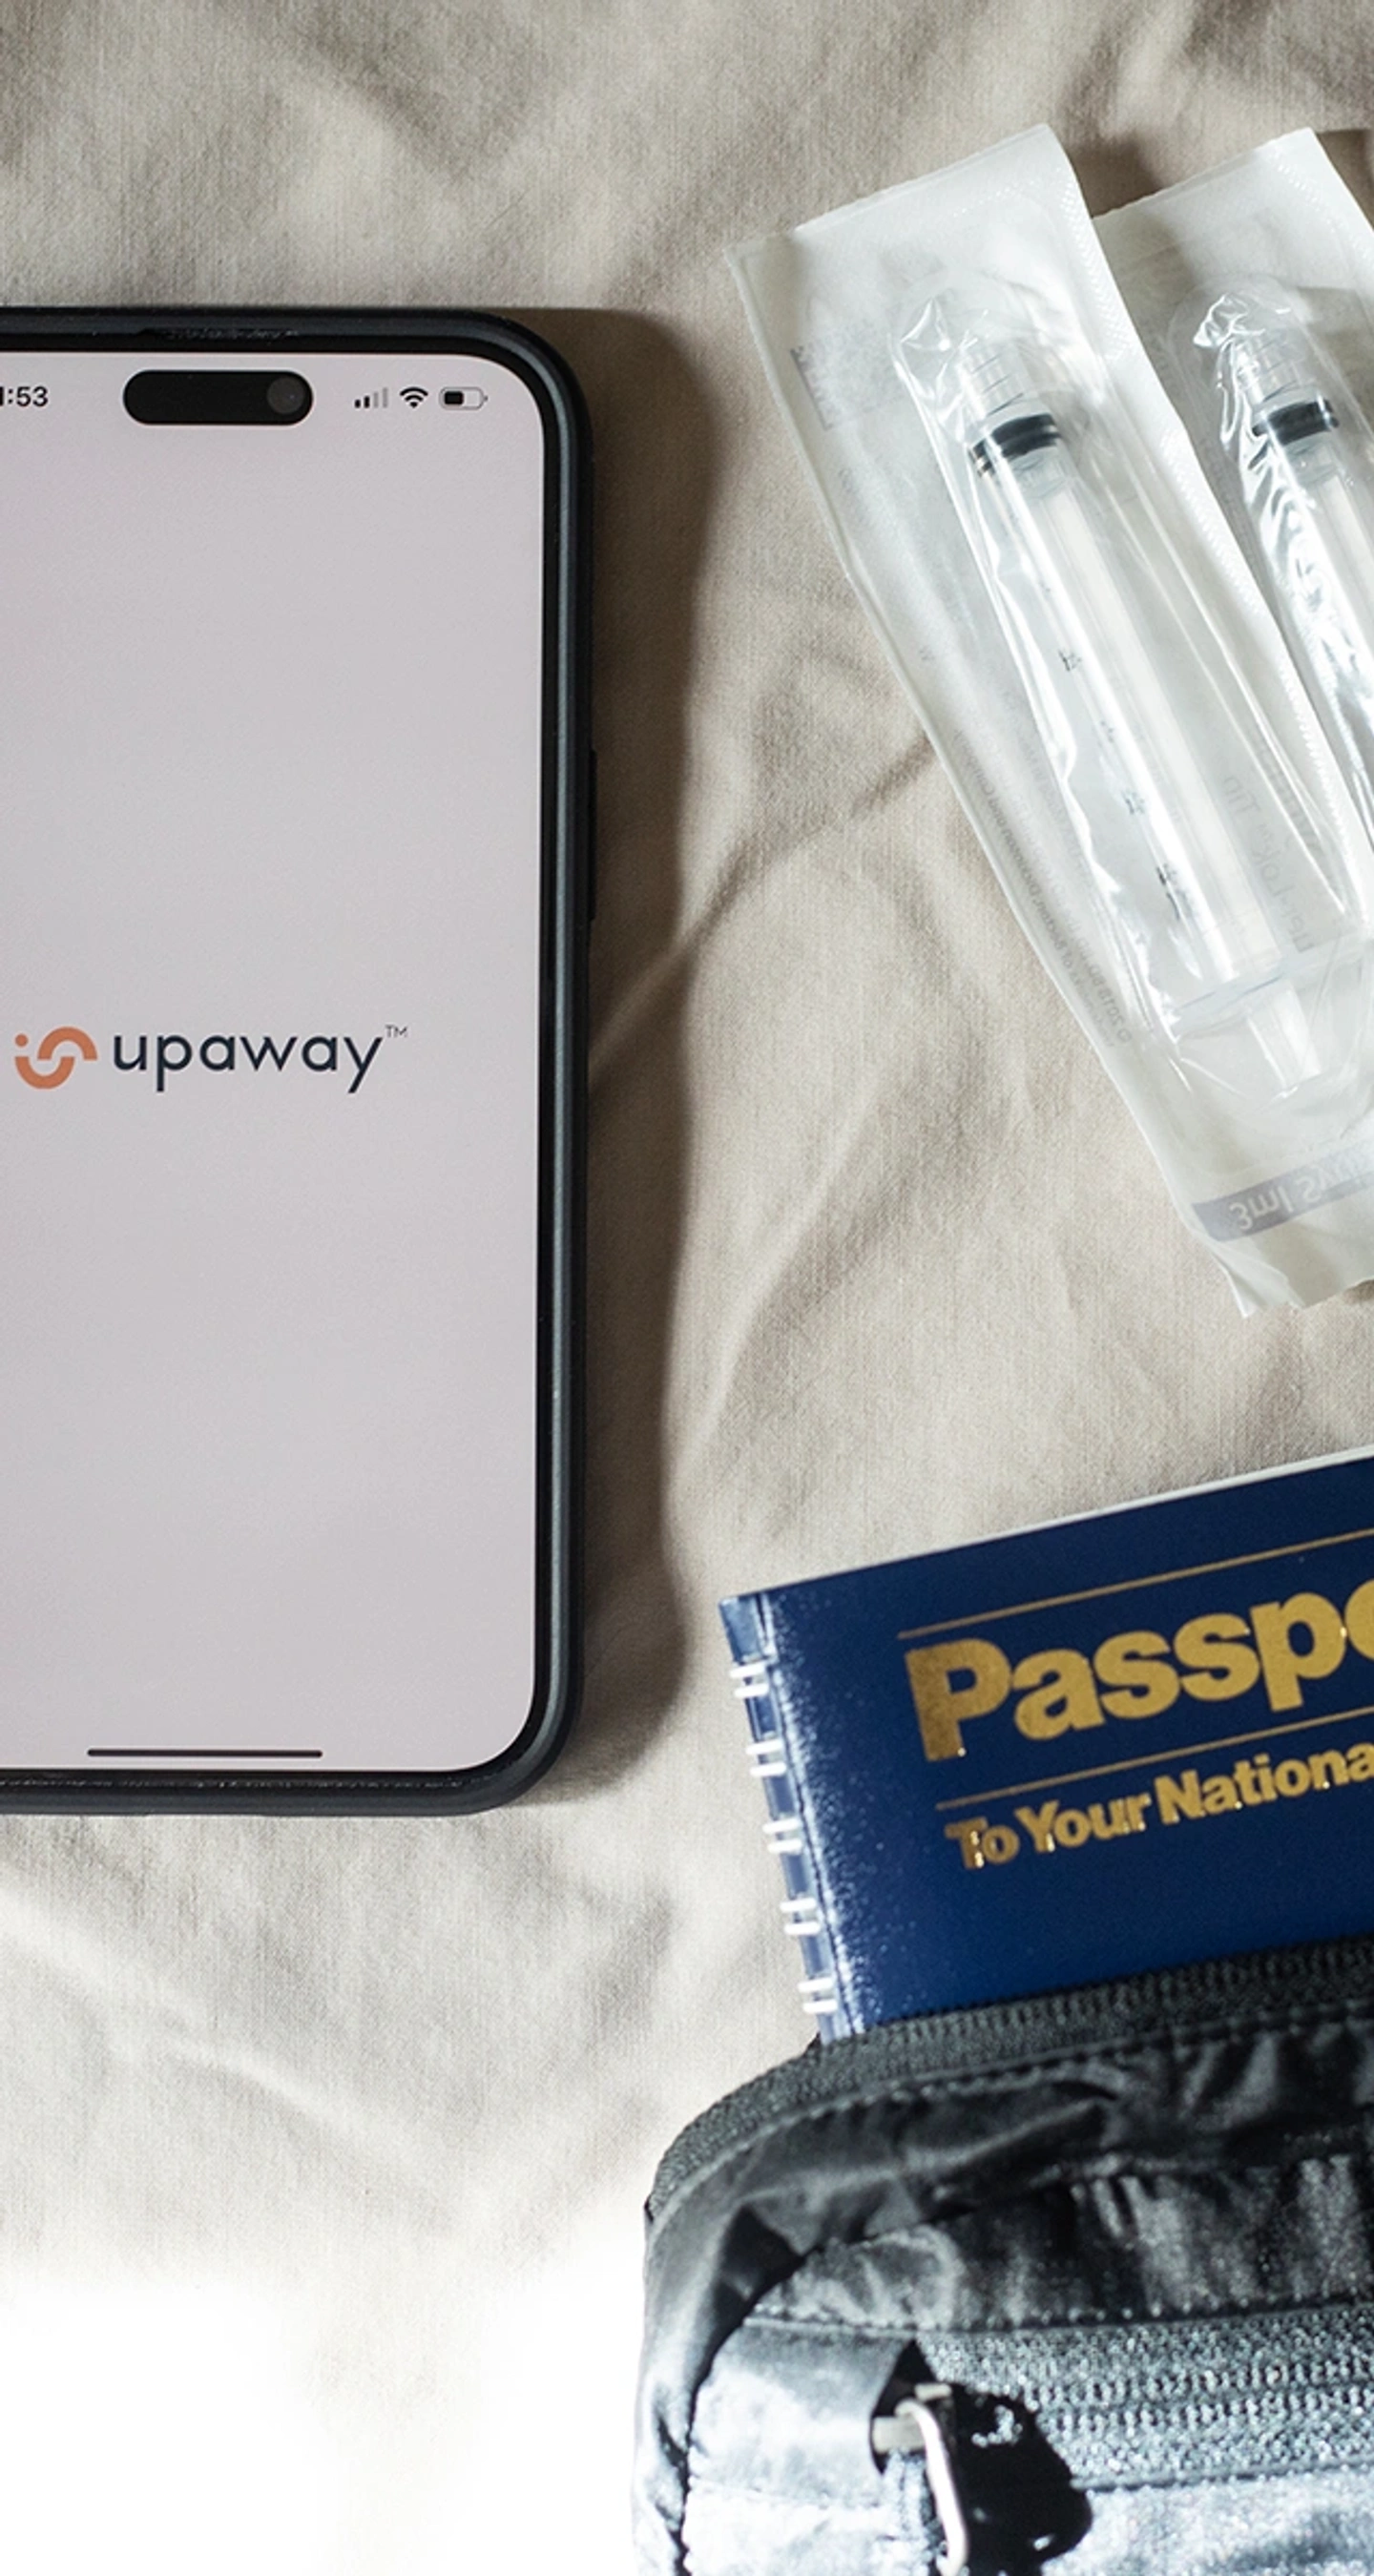 A smartphone with the Upaway app open, passport, syringes, needles, and band aids are spread out on a bed sheet.